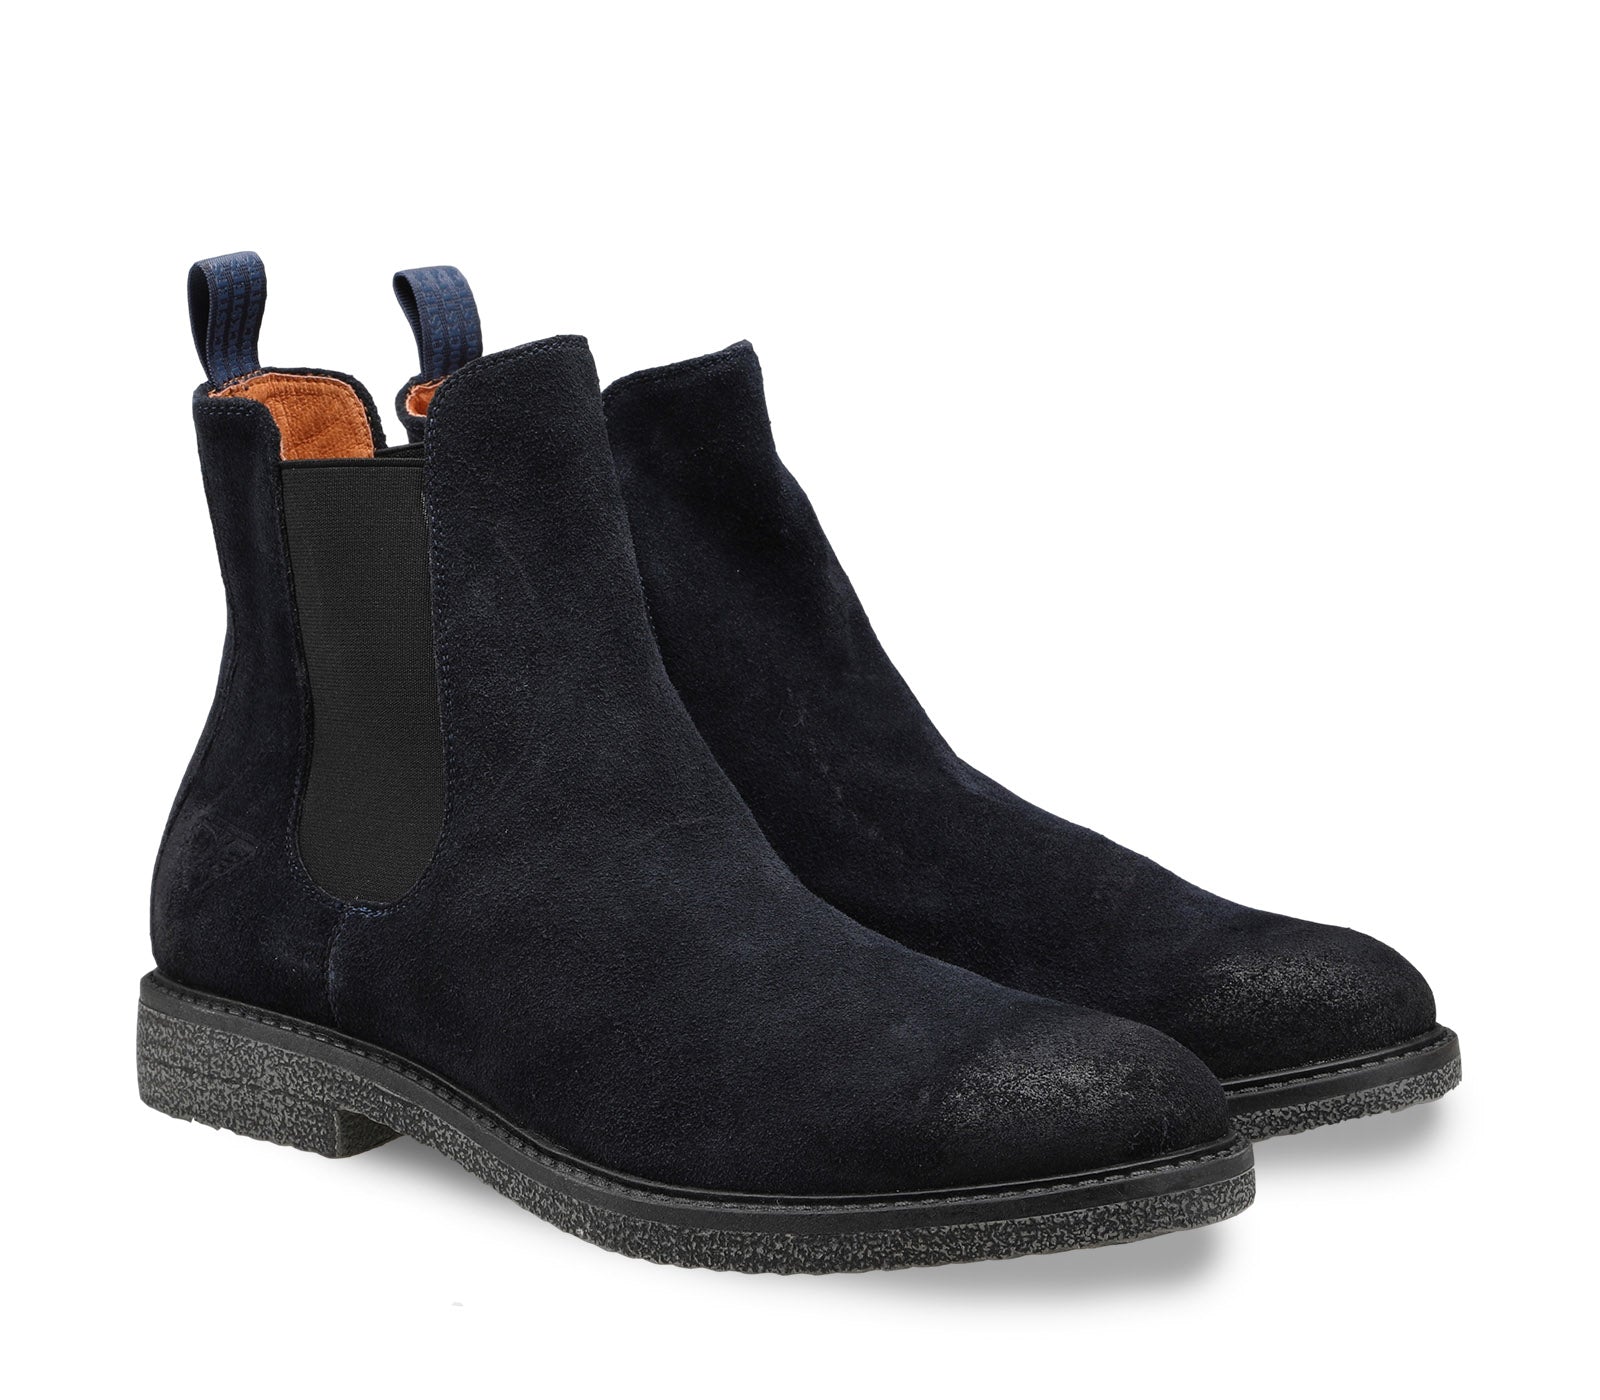 Men's Chelsea Ankle Boots in Suede with Elasticized Inserts